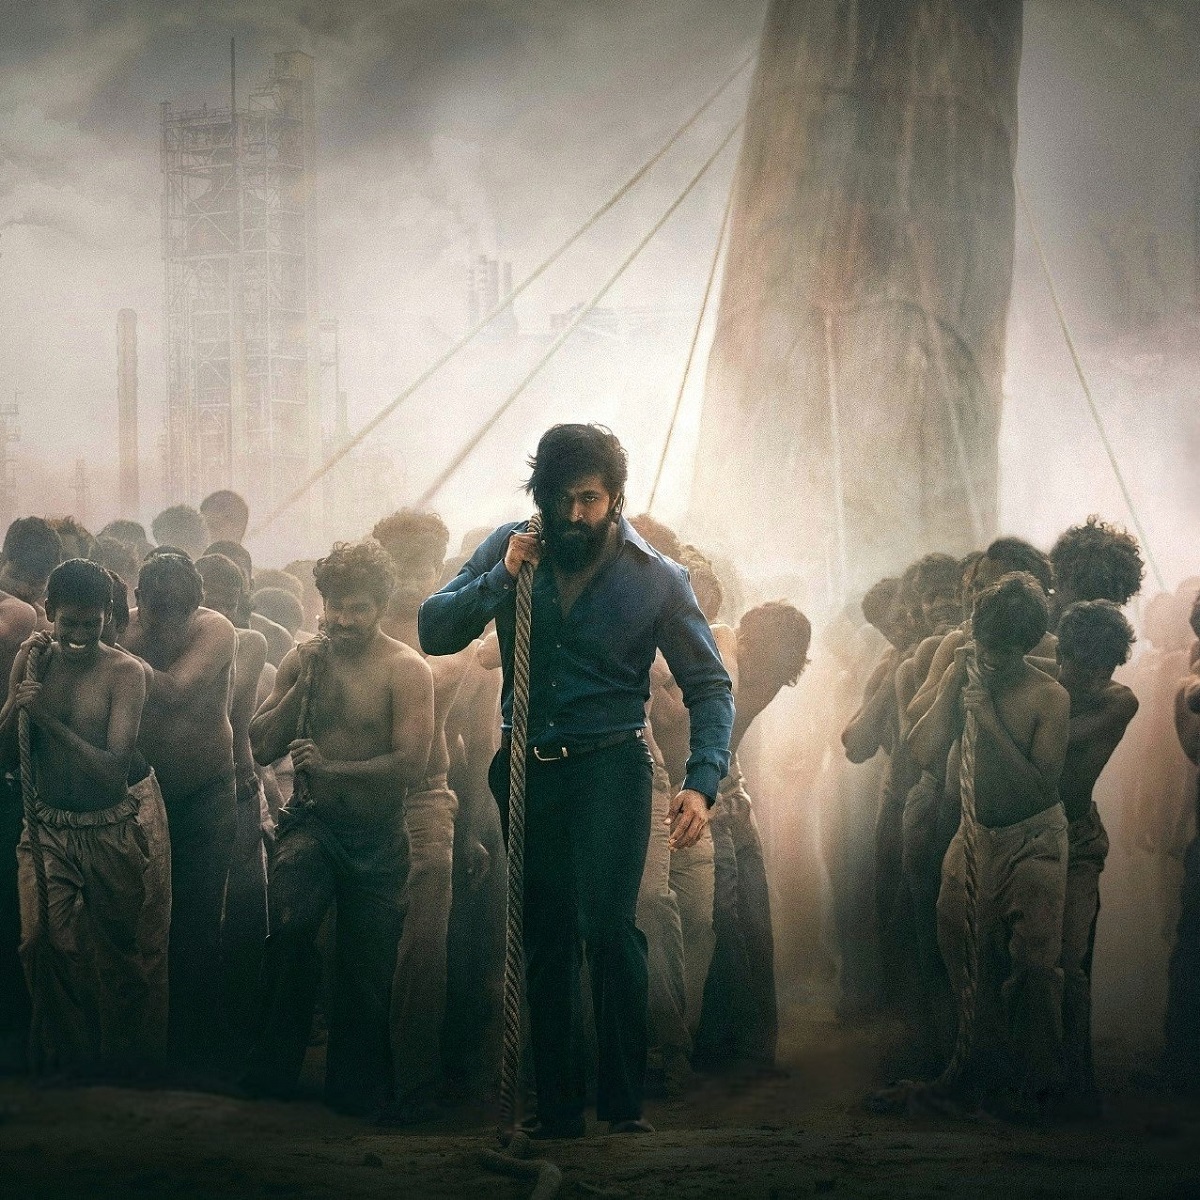 KGF Chapter 2 closing worldwide box office collections; Second highest grossing film ever in India